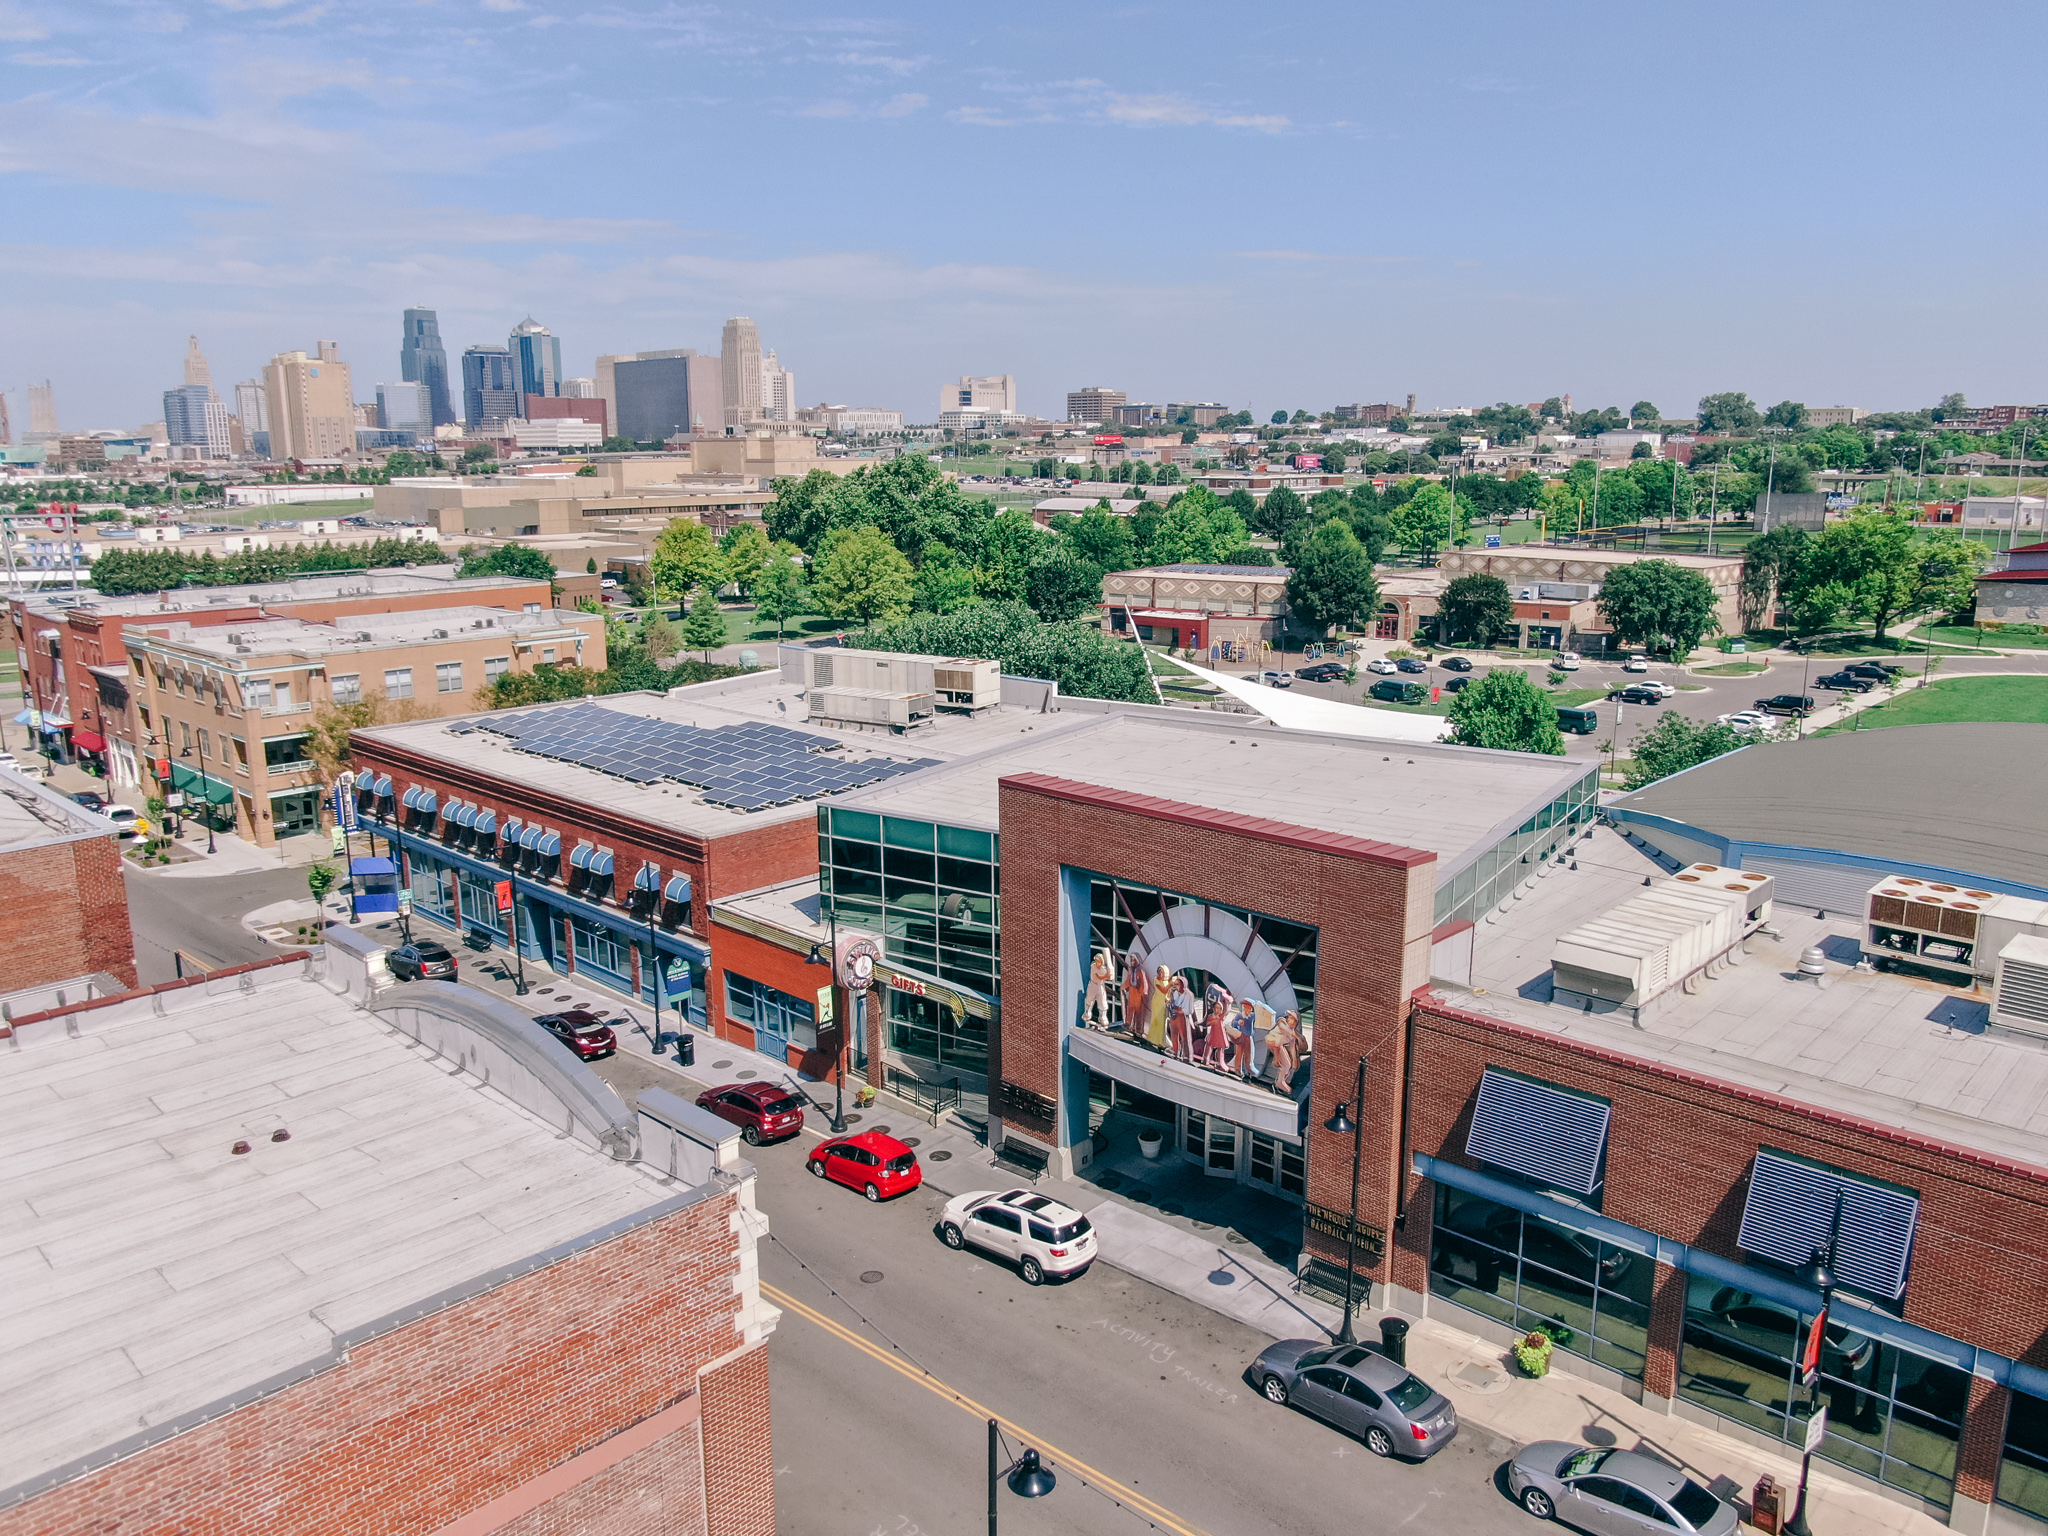 Aerial view of the historic 18th and Vine Jazz District in Kansas City, Missouri